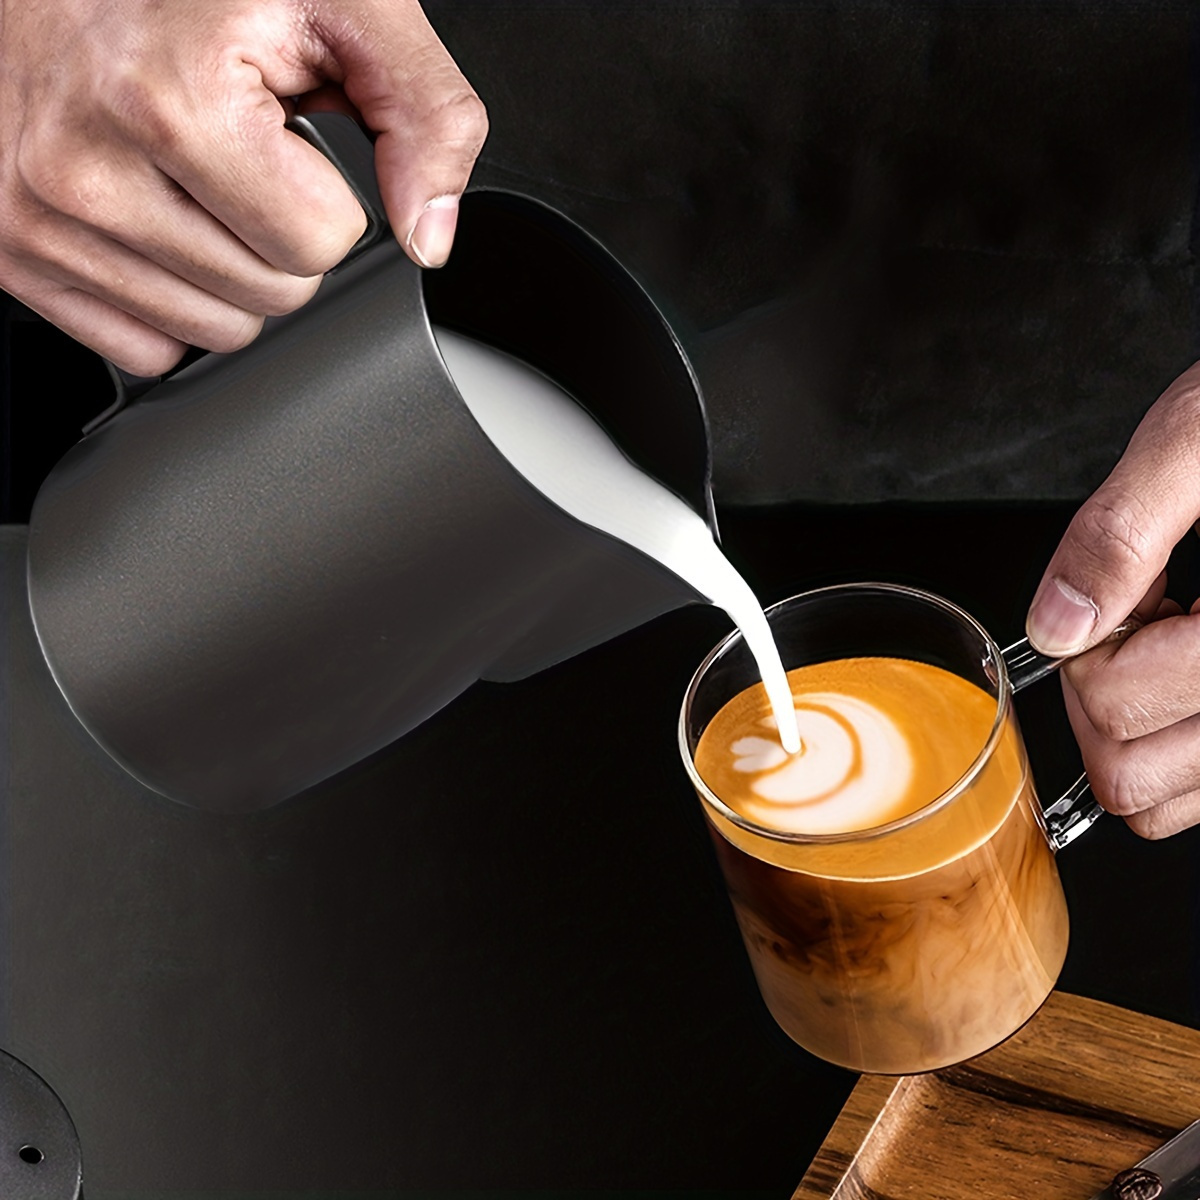 Stainless Steel Milk Frother Cup - Espresso Steaming Pitchers Coffee Foam  Making Pitcher Latte Art Froth Cup Steaming Jug Cappuccino Hot Chocolate 20